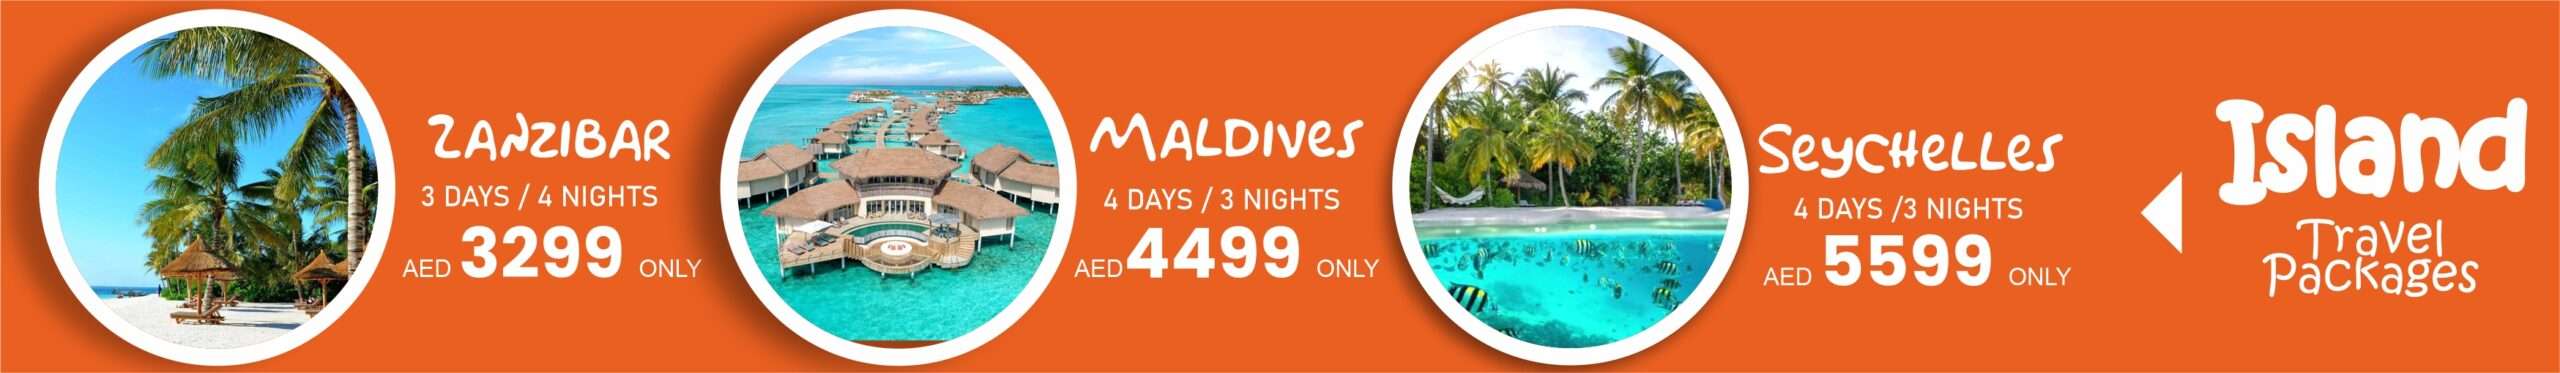 Island travel packages - ew web banner